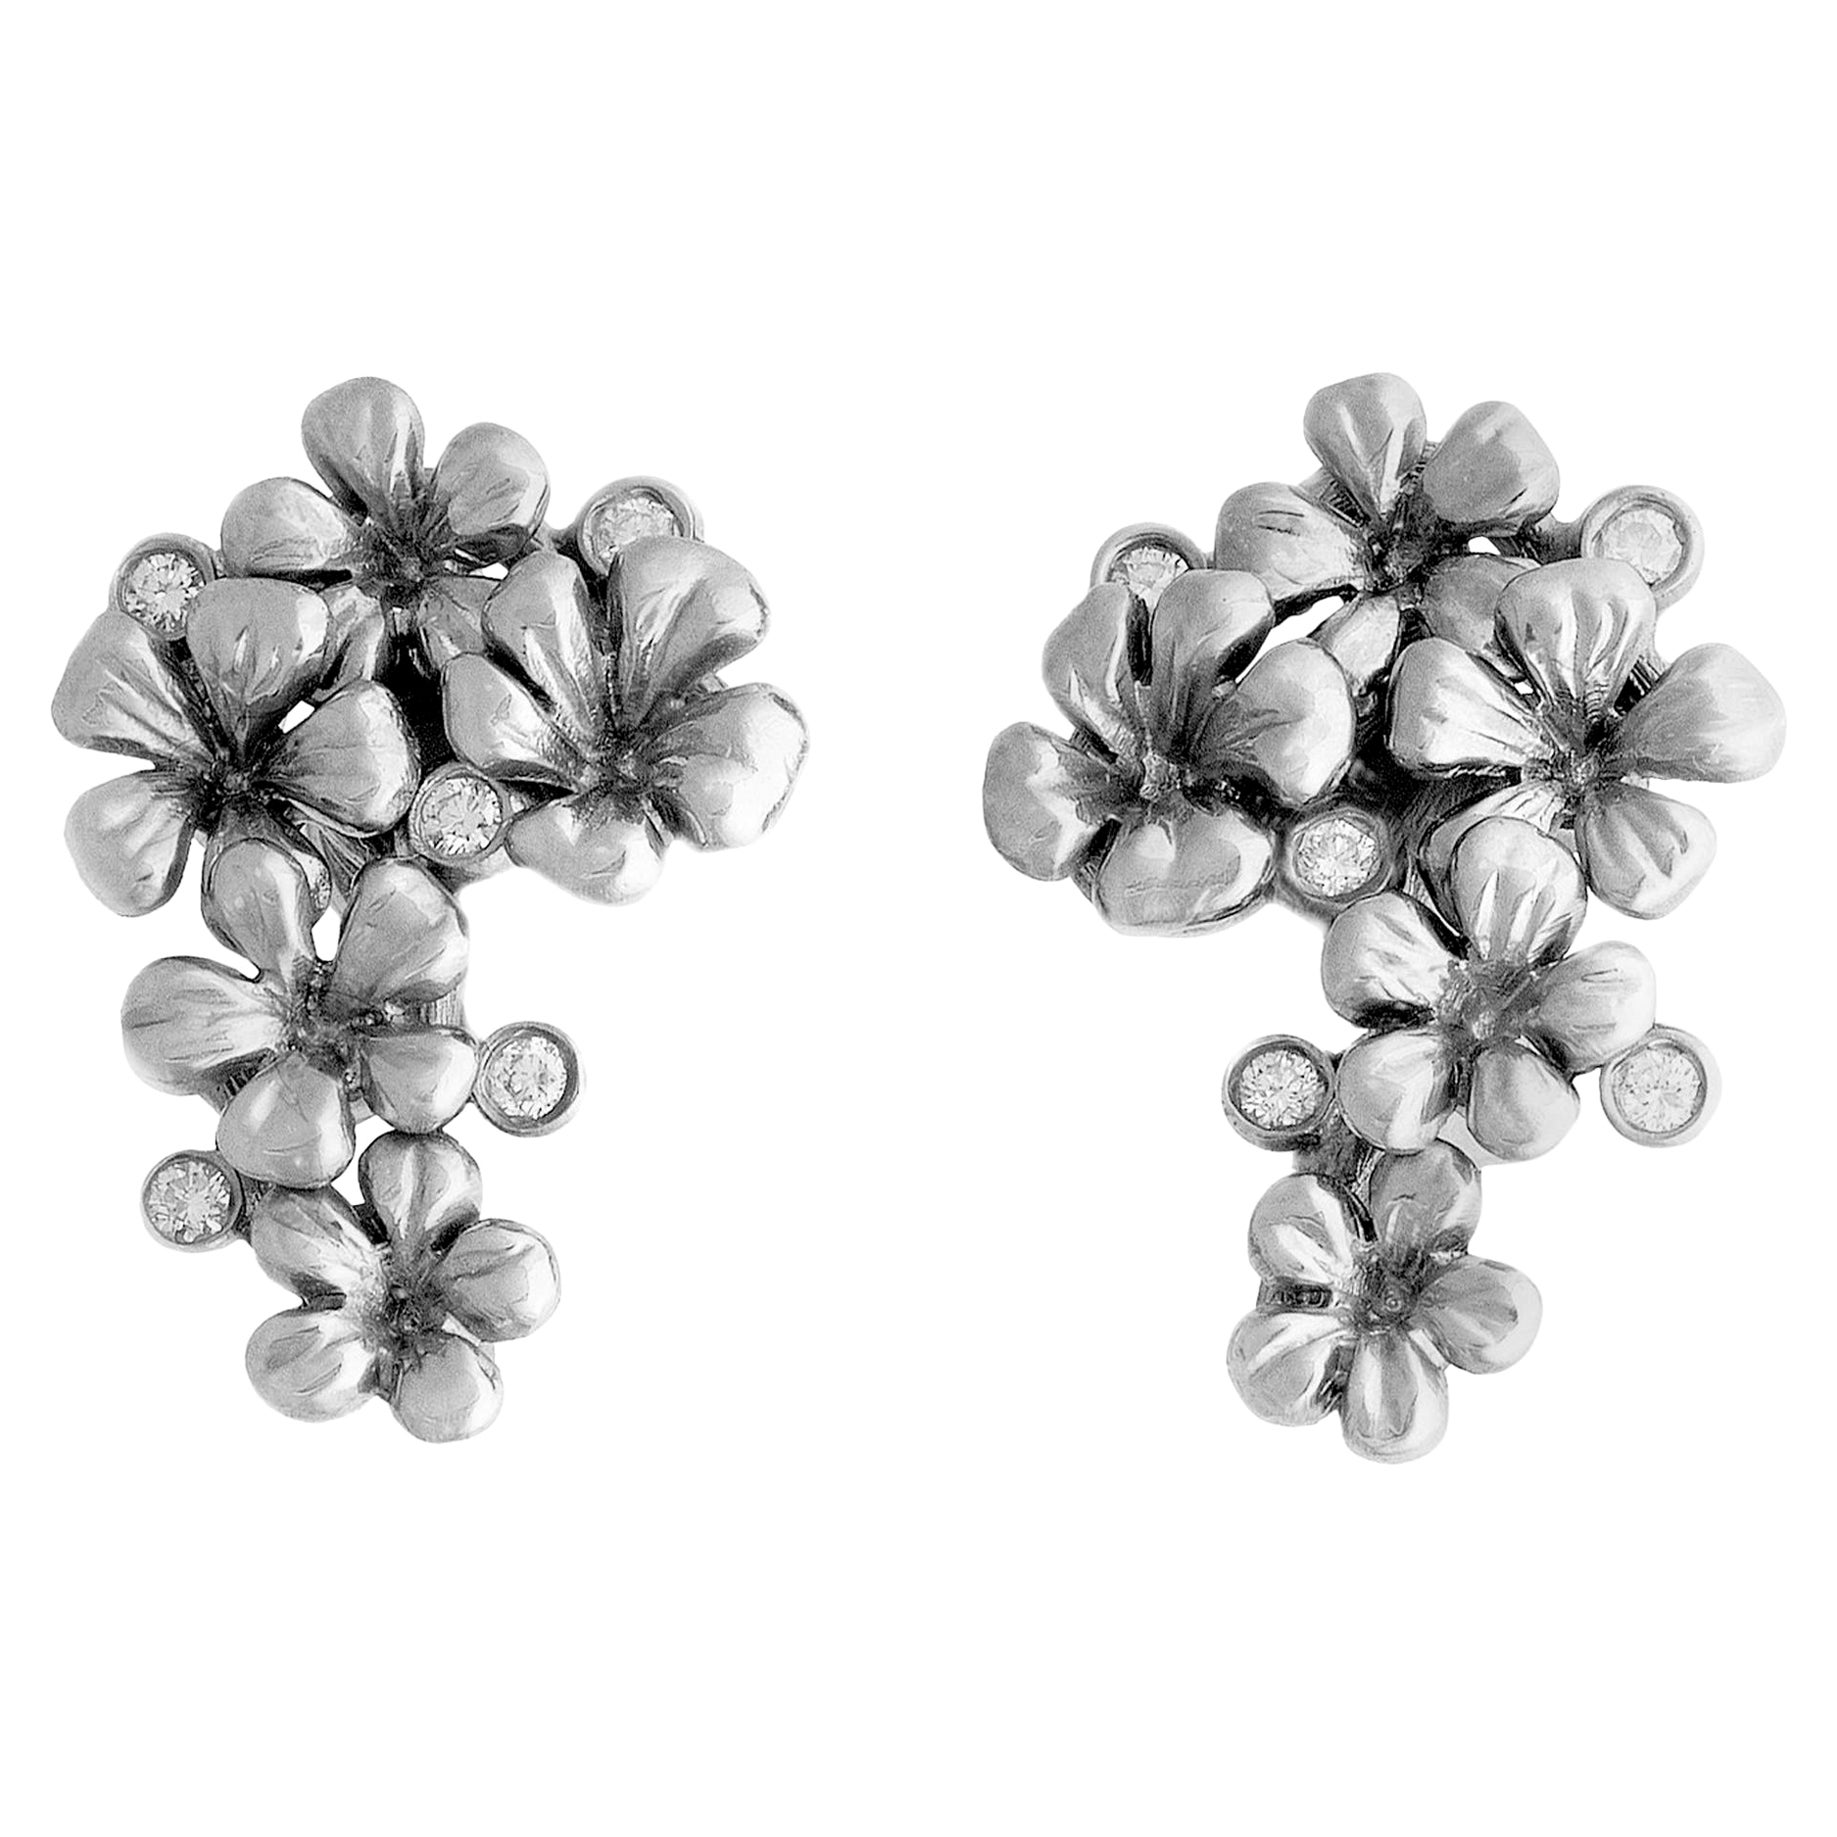 White Gold Plated Blossom Clip-On Earrings with Diamonds by the Artist